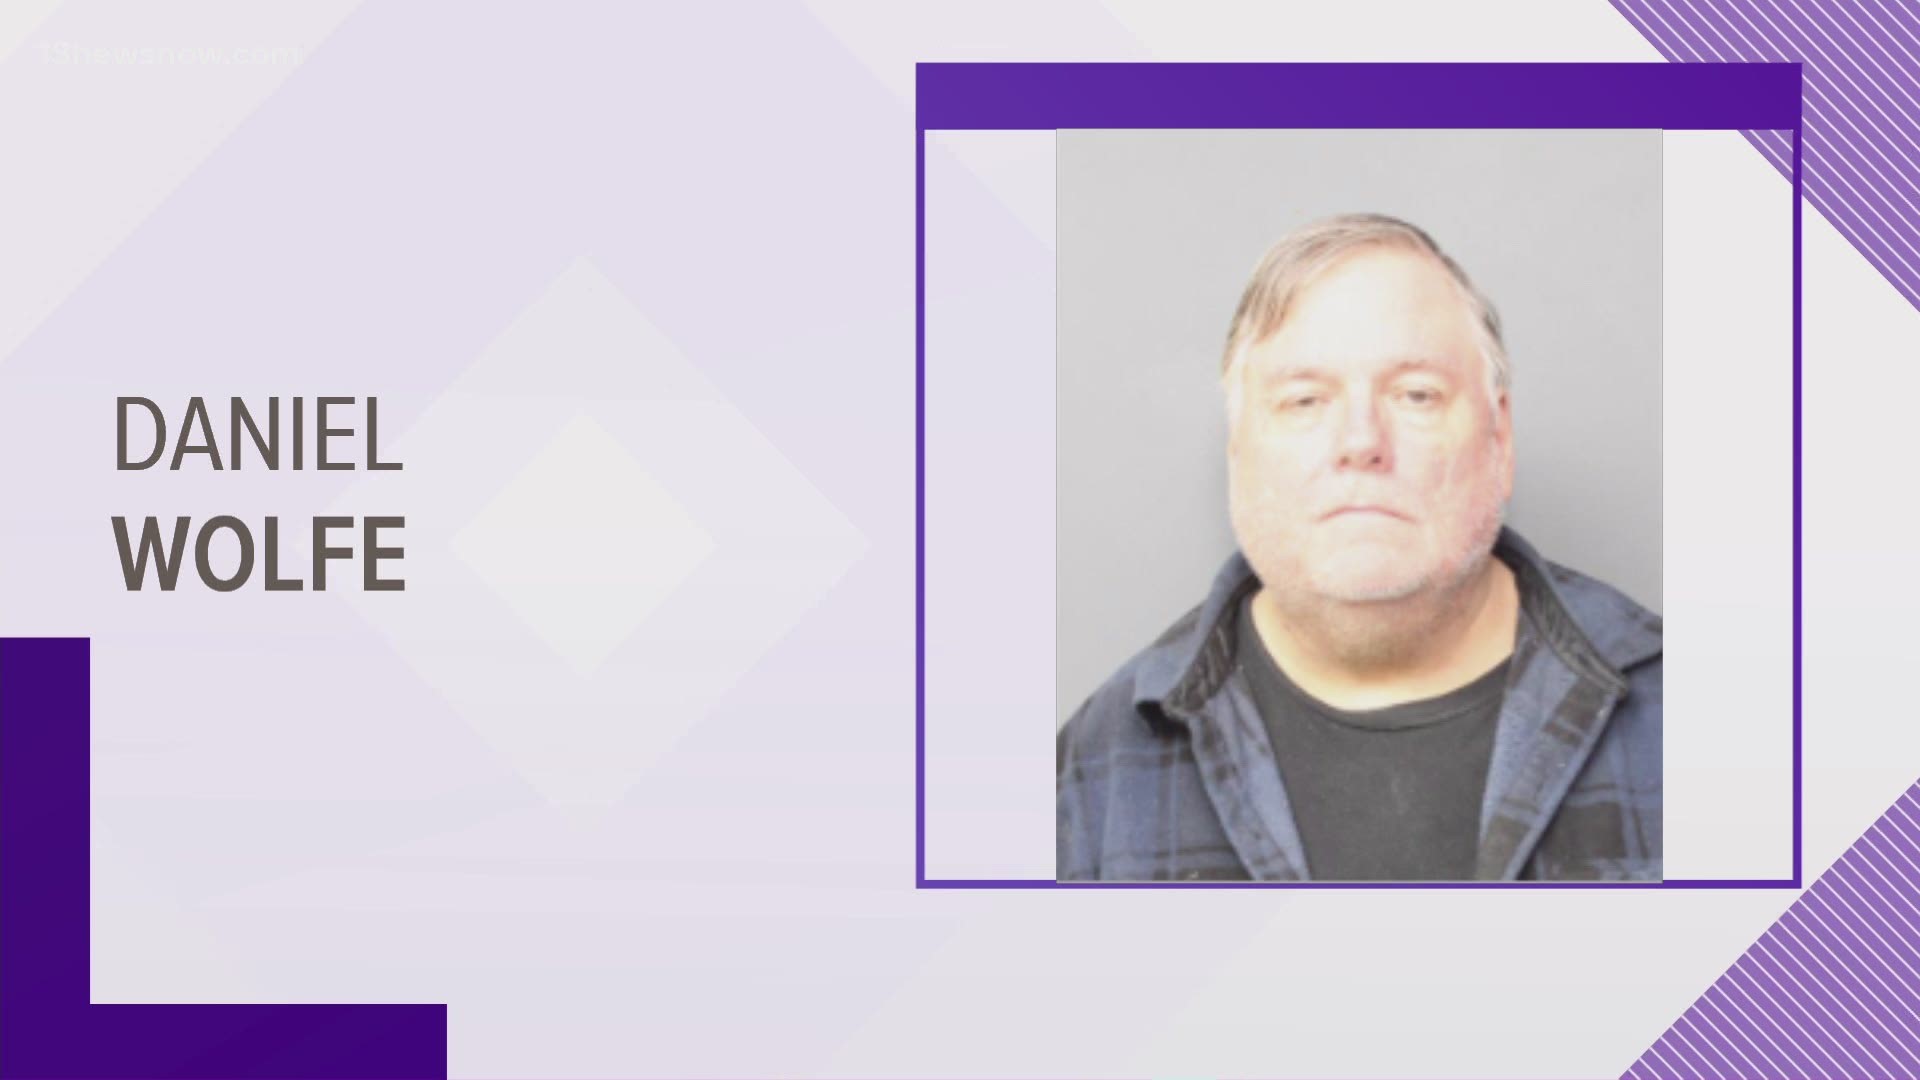 Daniel Wolfe pleaded guilty to abusing a 15-year-old when he taught at Norfolk Catholic High School in the late 1970s.